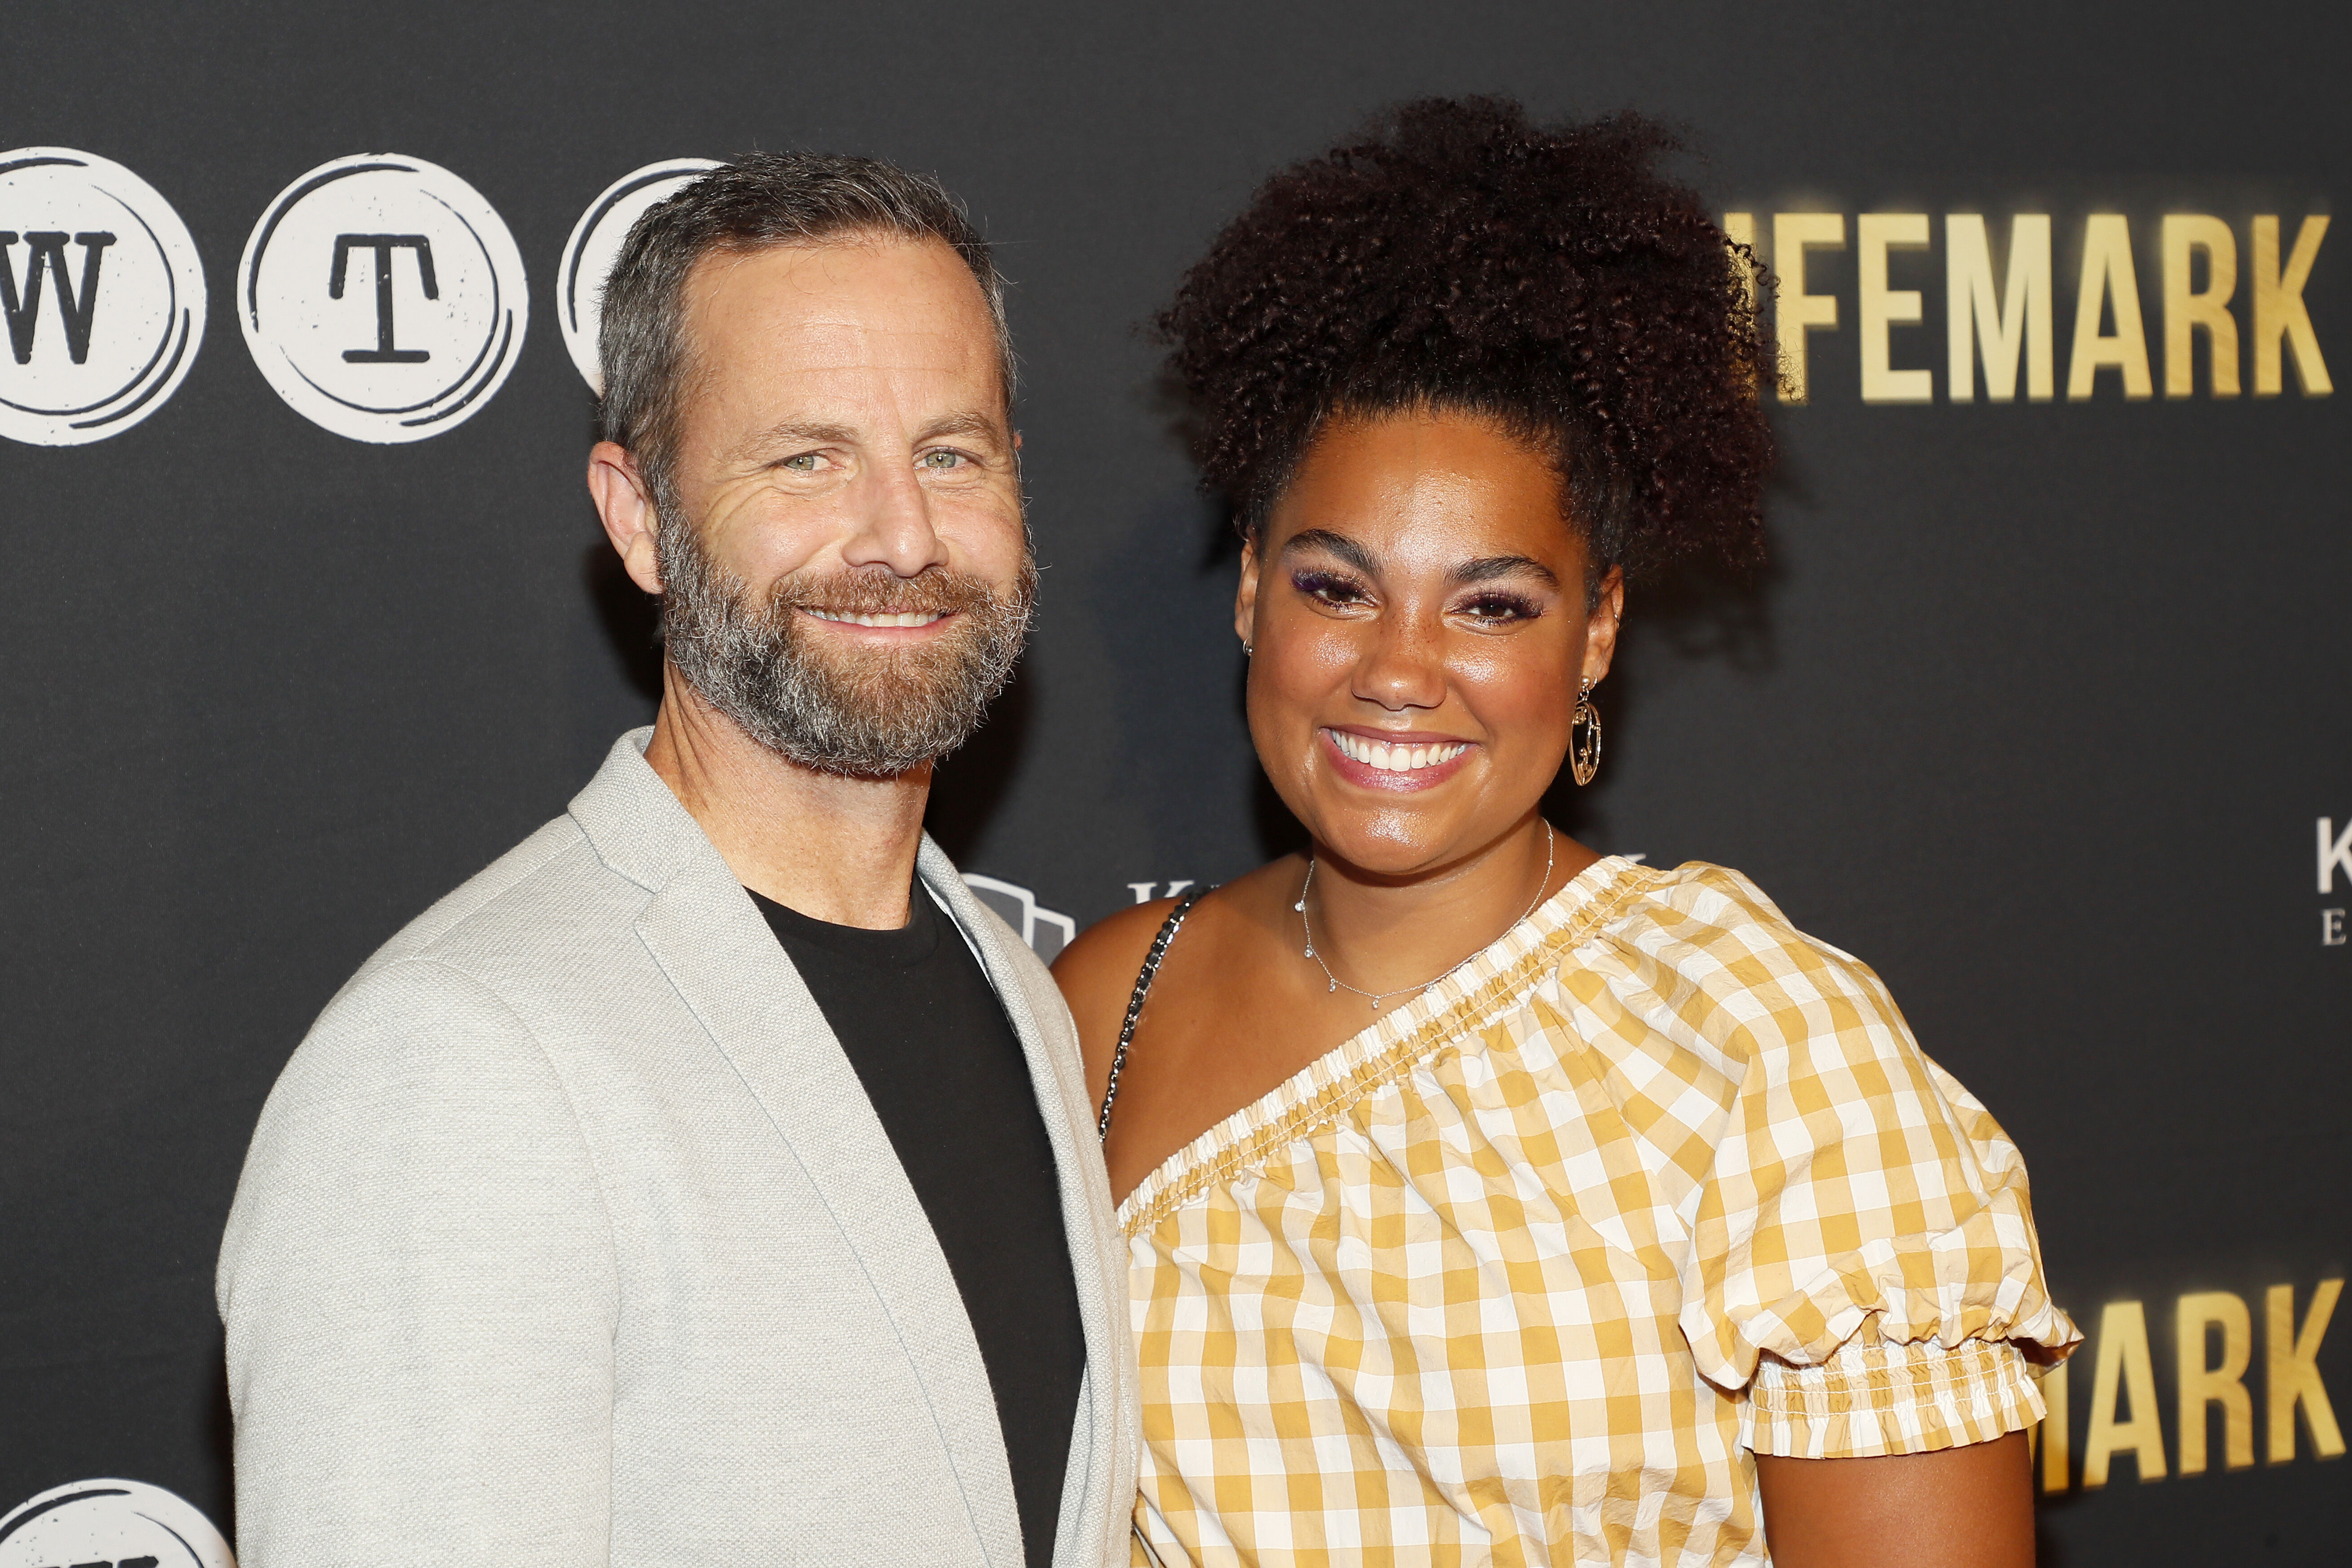 Kirk Cameron and Ahna Cameron Bower at the premiere of "Lifemark" in Washington, D.C. on September 7, 2022 | Source: Getty Images